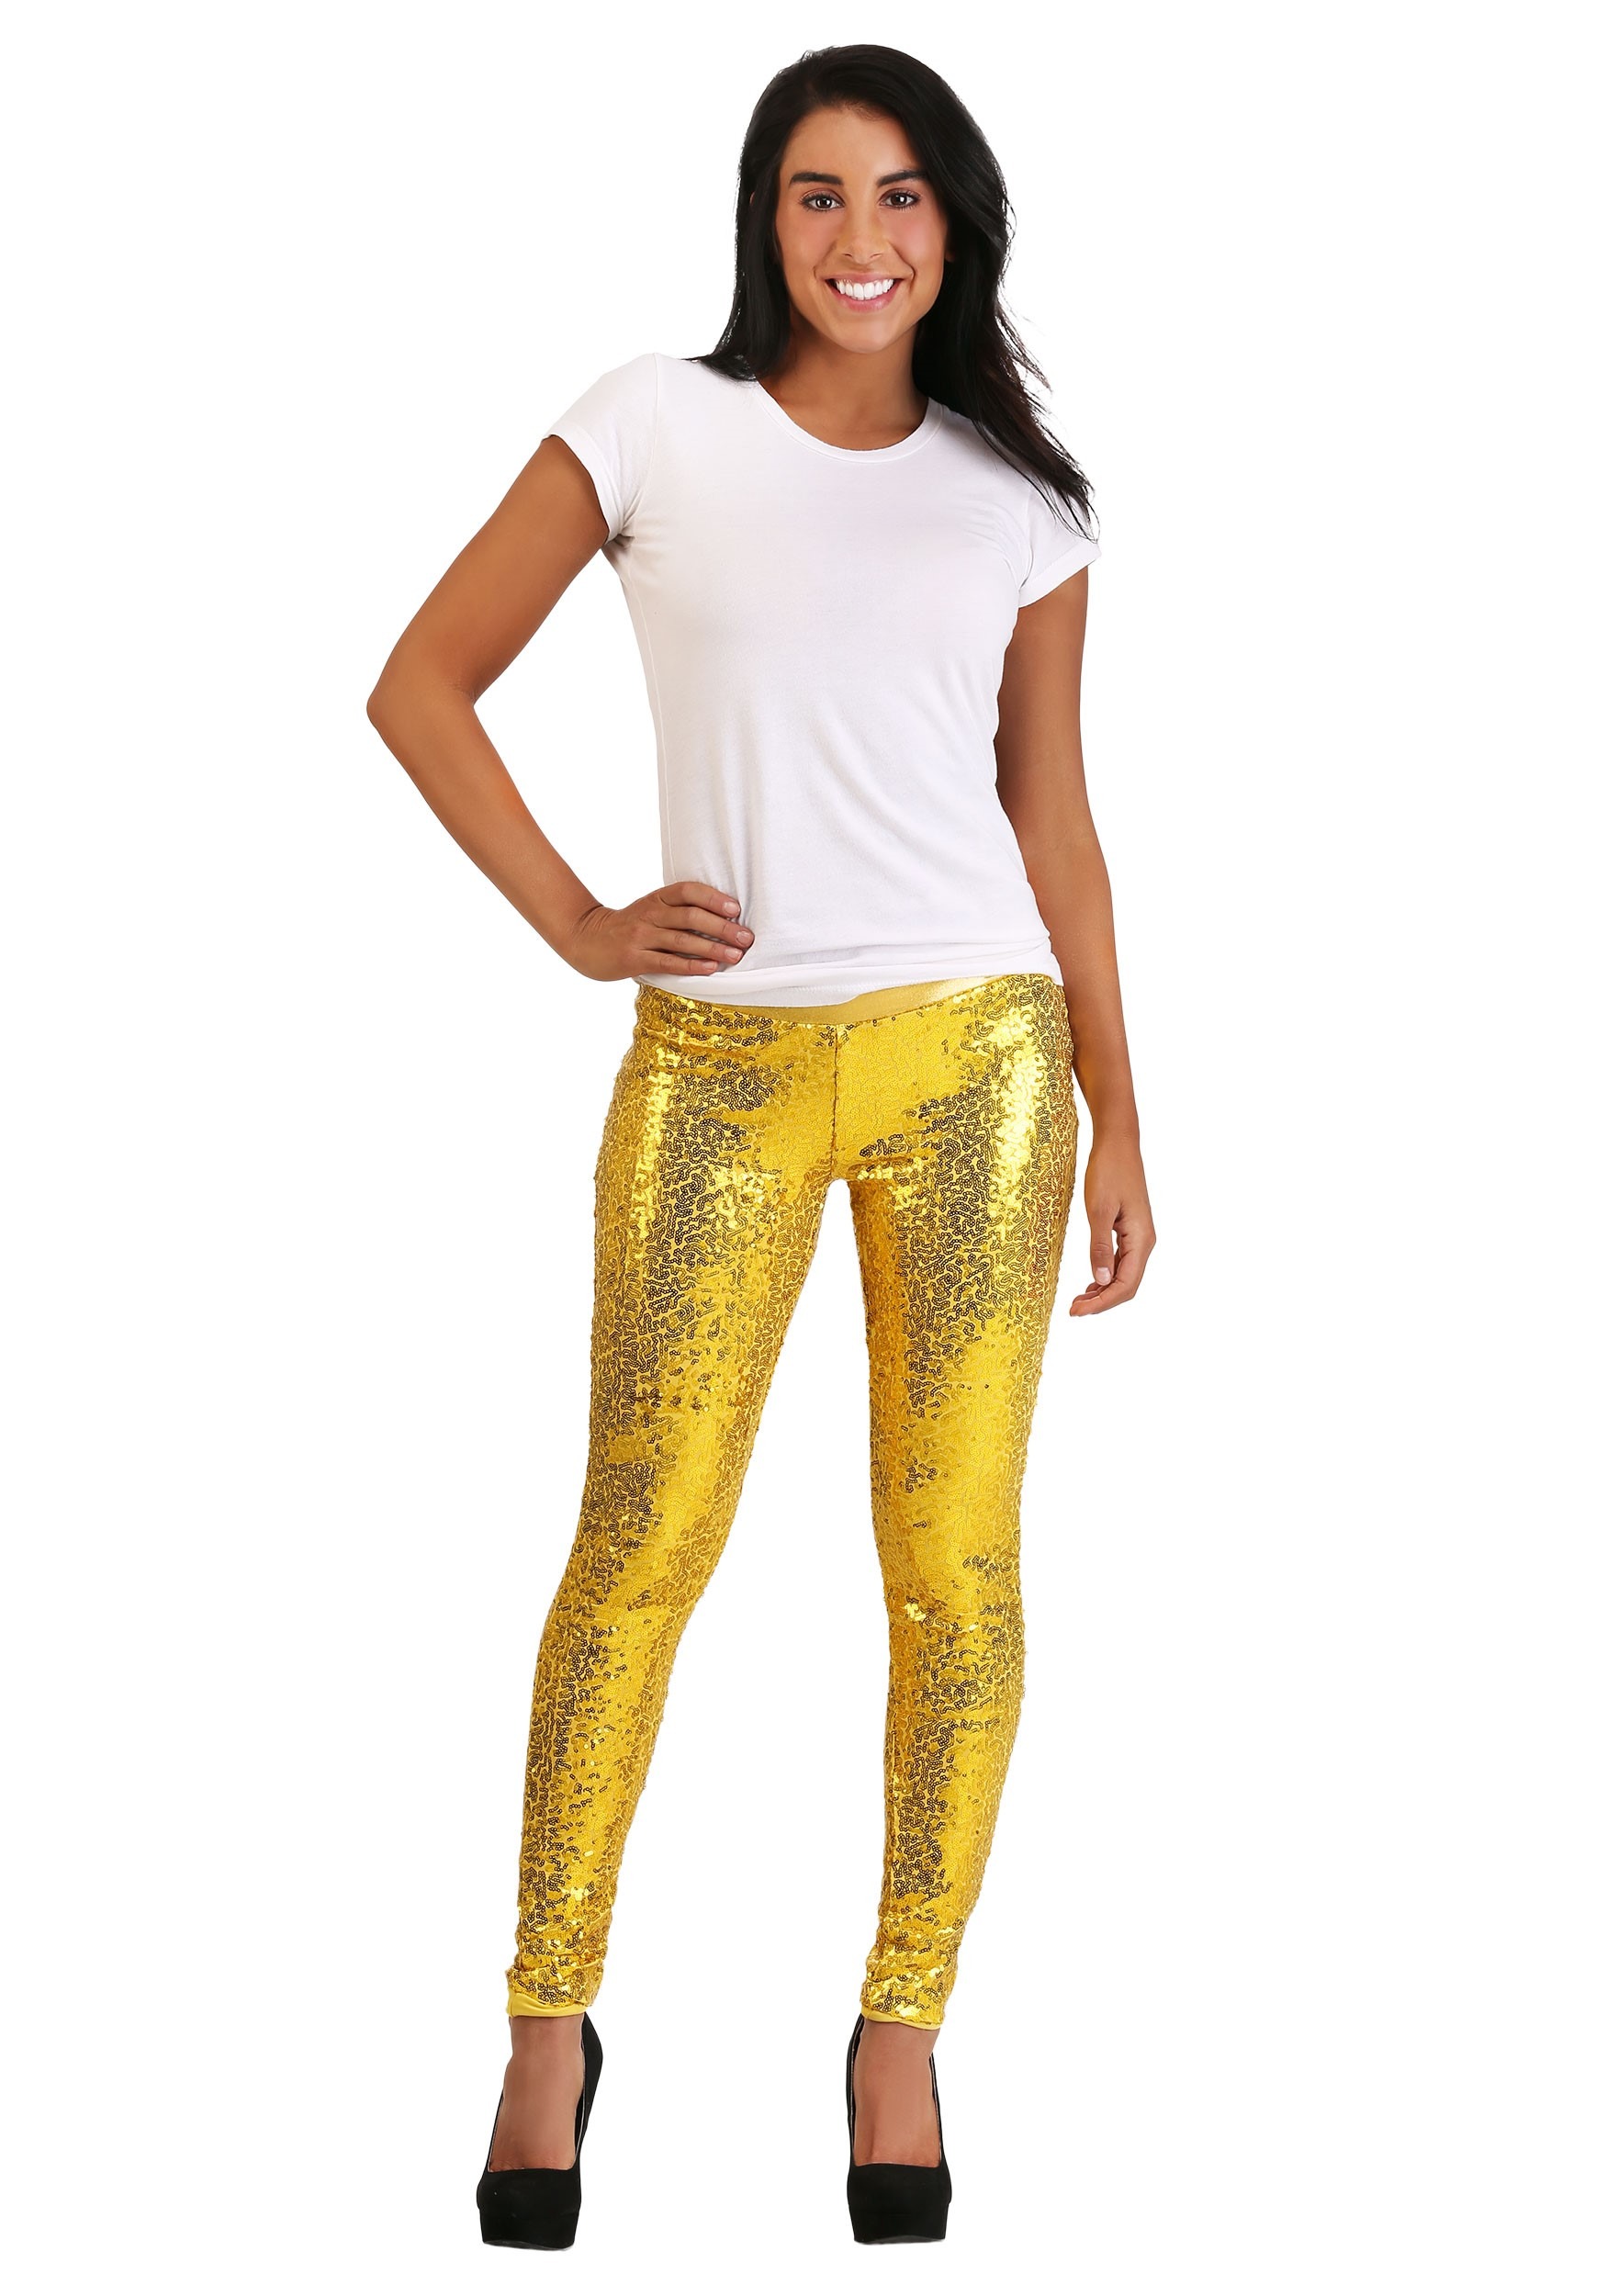 Tipsy Elves Shiny Sequin Leggings for Women for Holiday Outfits and Beyond